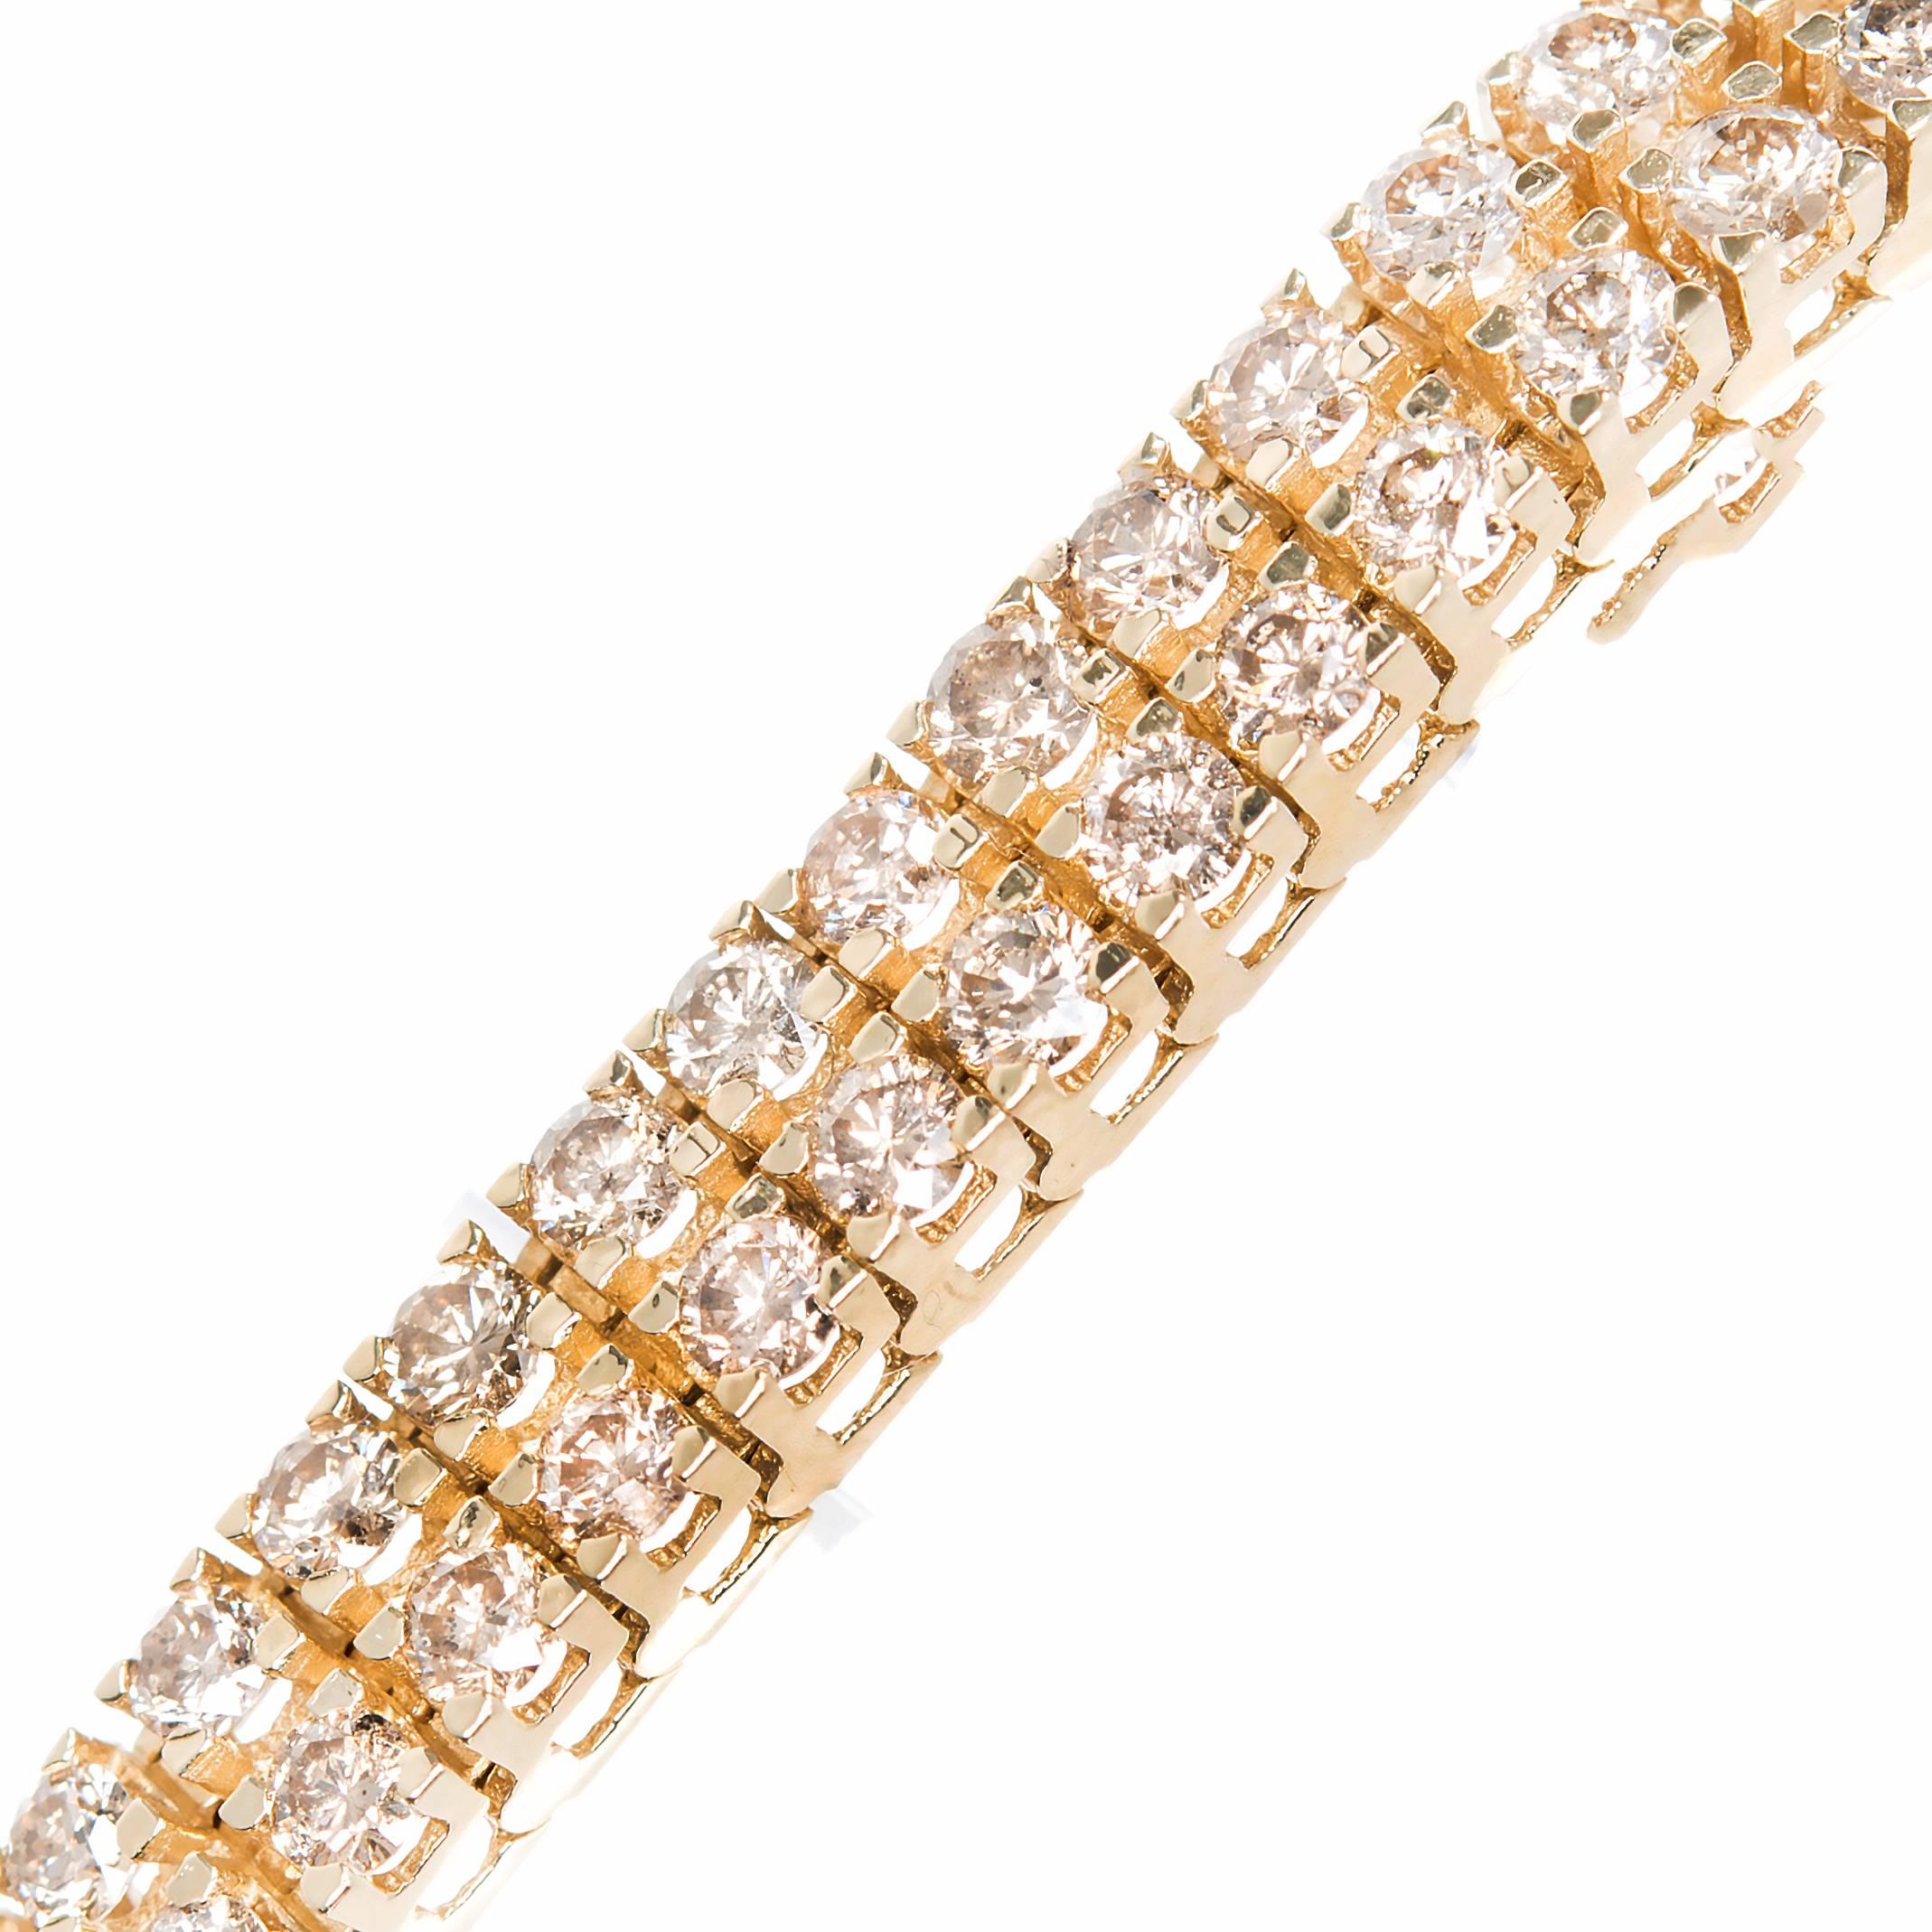 1980's Two row light brown, yellow diamond 14k yellow gold bracelet. 114 round cut diamonds totaling 8.00cts  White gold tongue on catch. Built in catch and side lock safety. 6.8 inches in length.

114 natural fancy golden yellow diamonds approx.